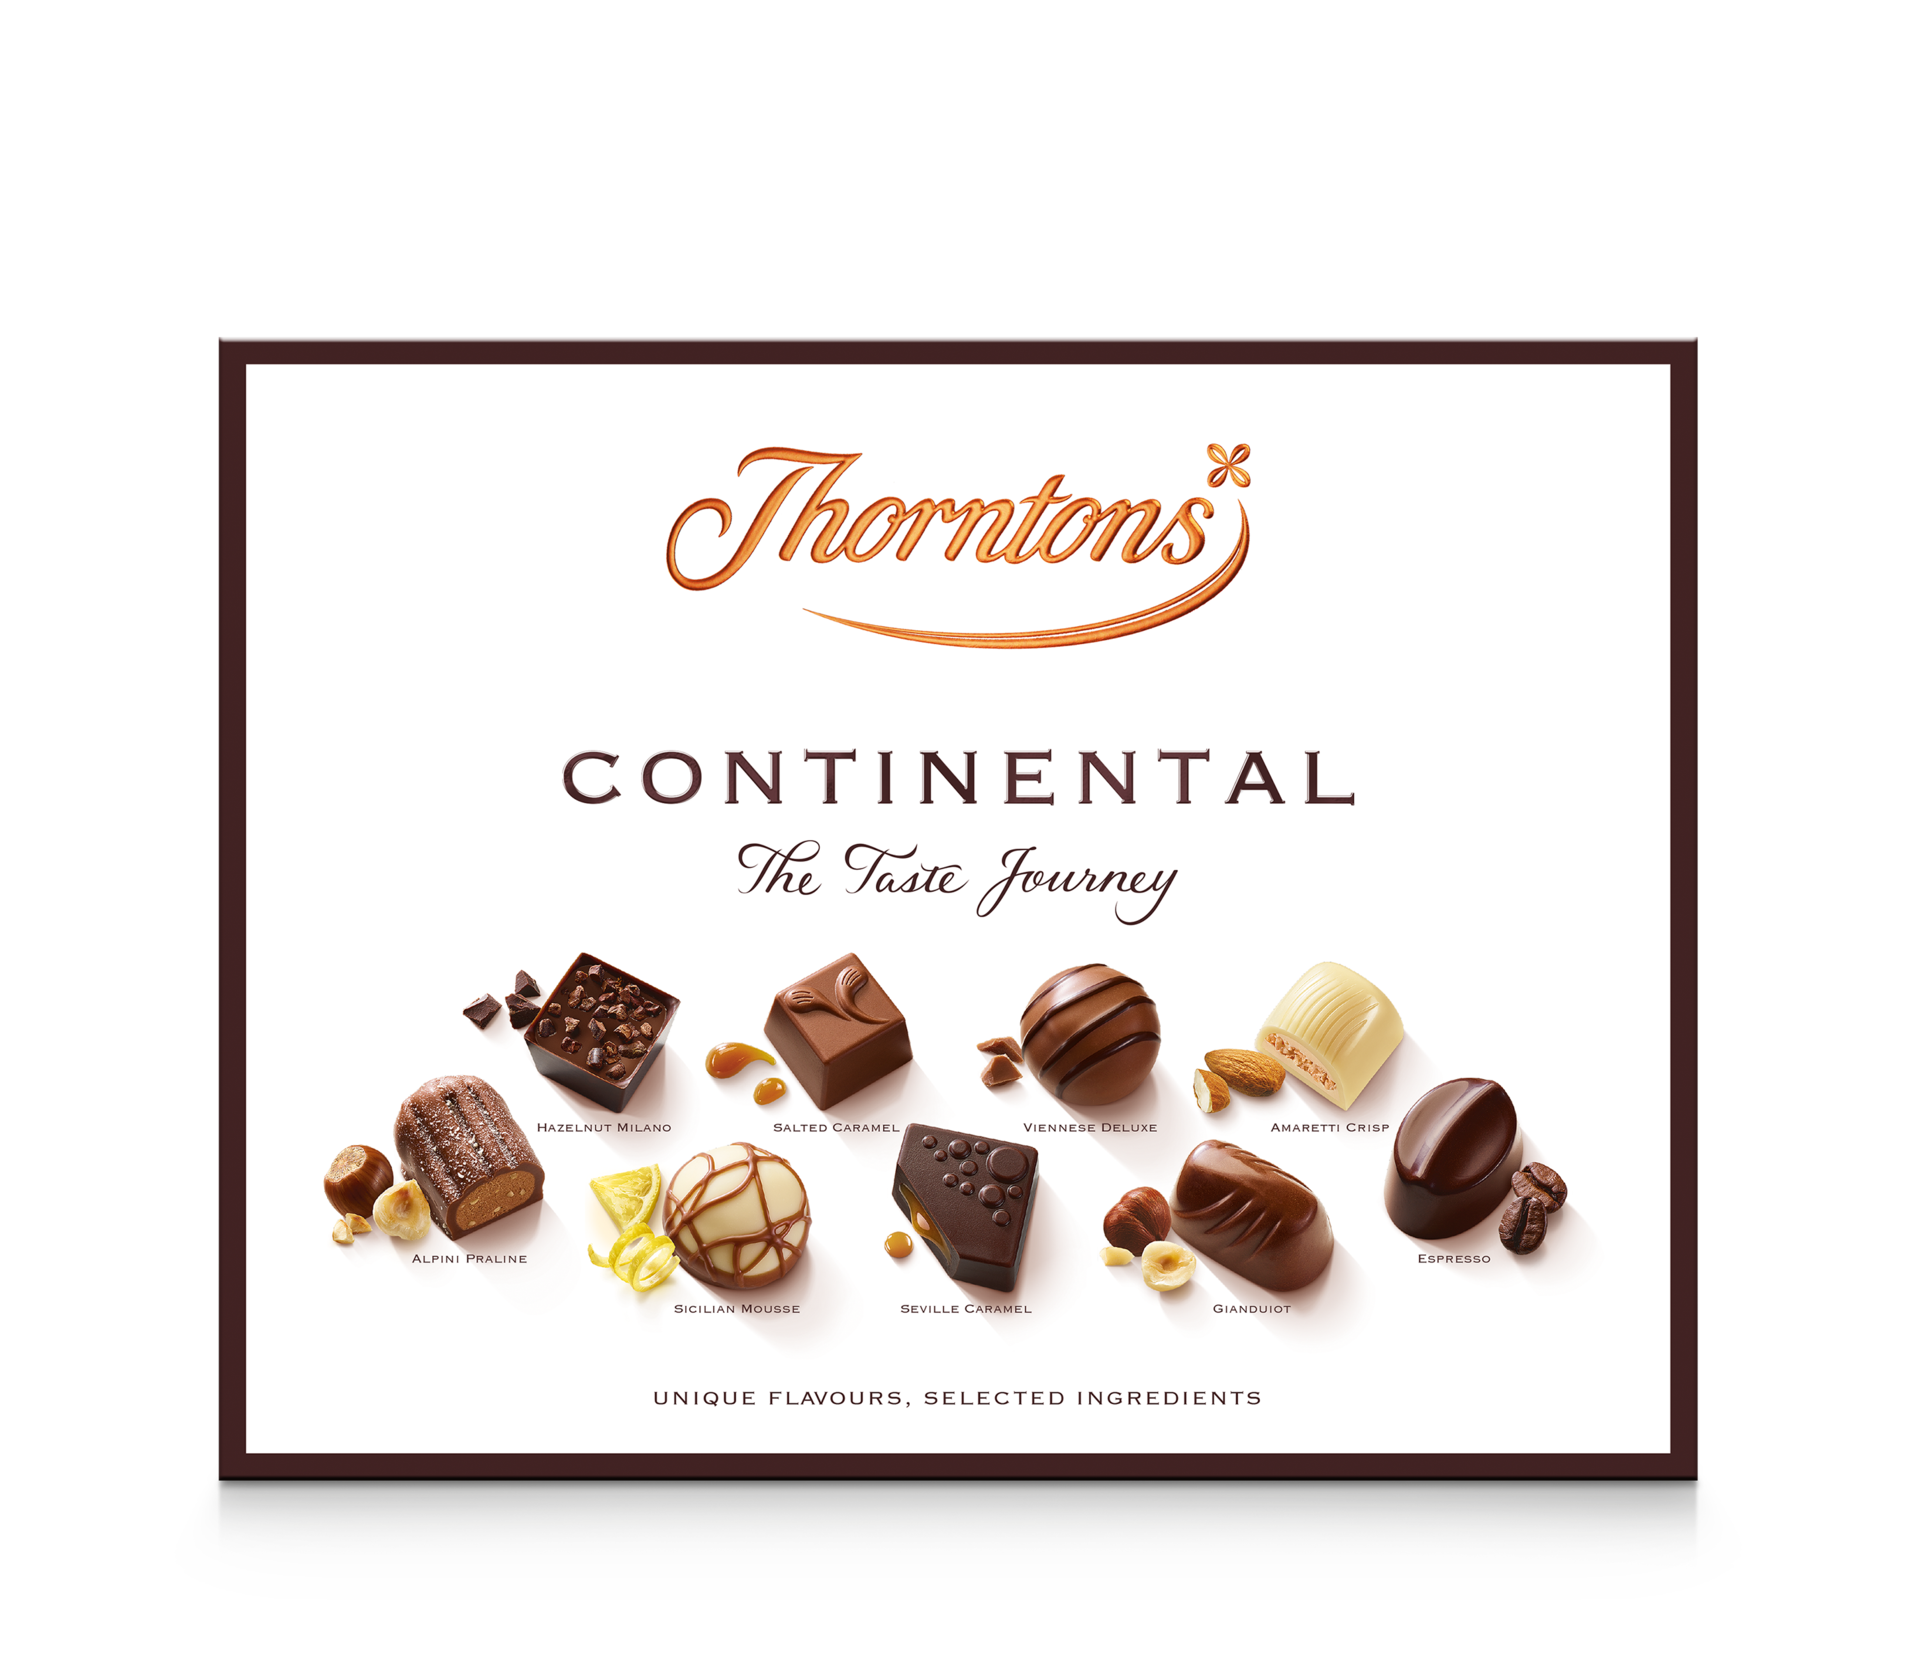 https://www.thorntons.com/medias/sys_master/images/hac/h07/8916765311006/77229484_main/77229484-main.png?resize=xs-s-xs